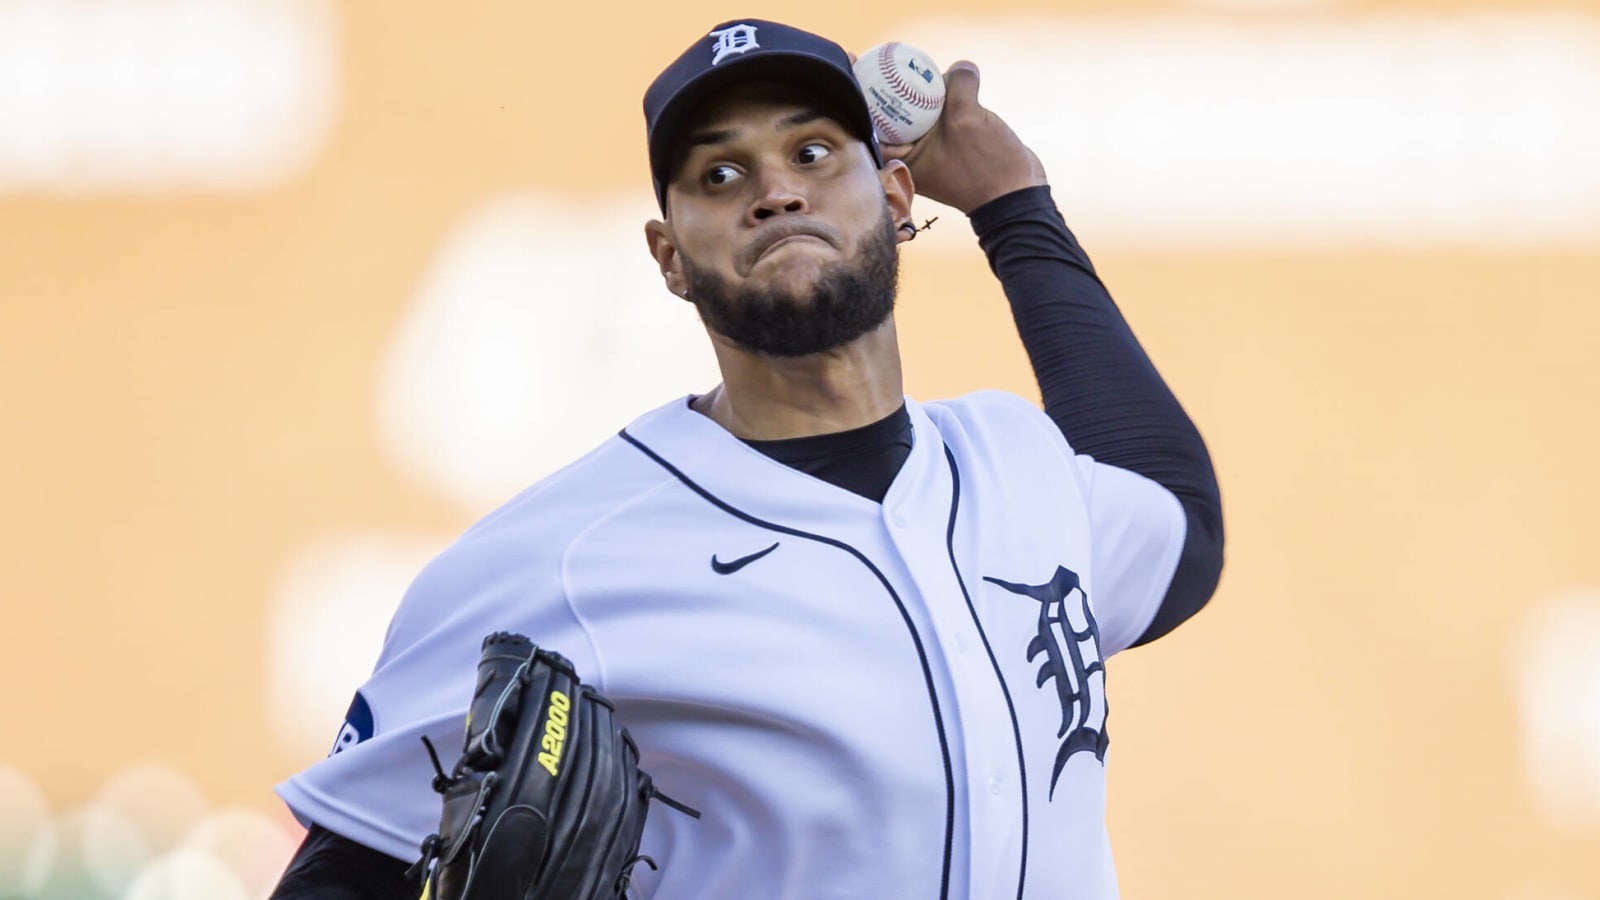 Tigers haven't heard from Rodriguez since departure